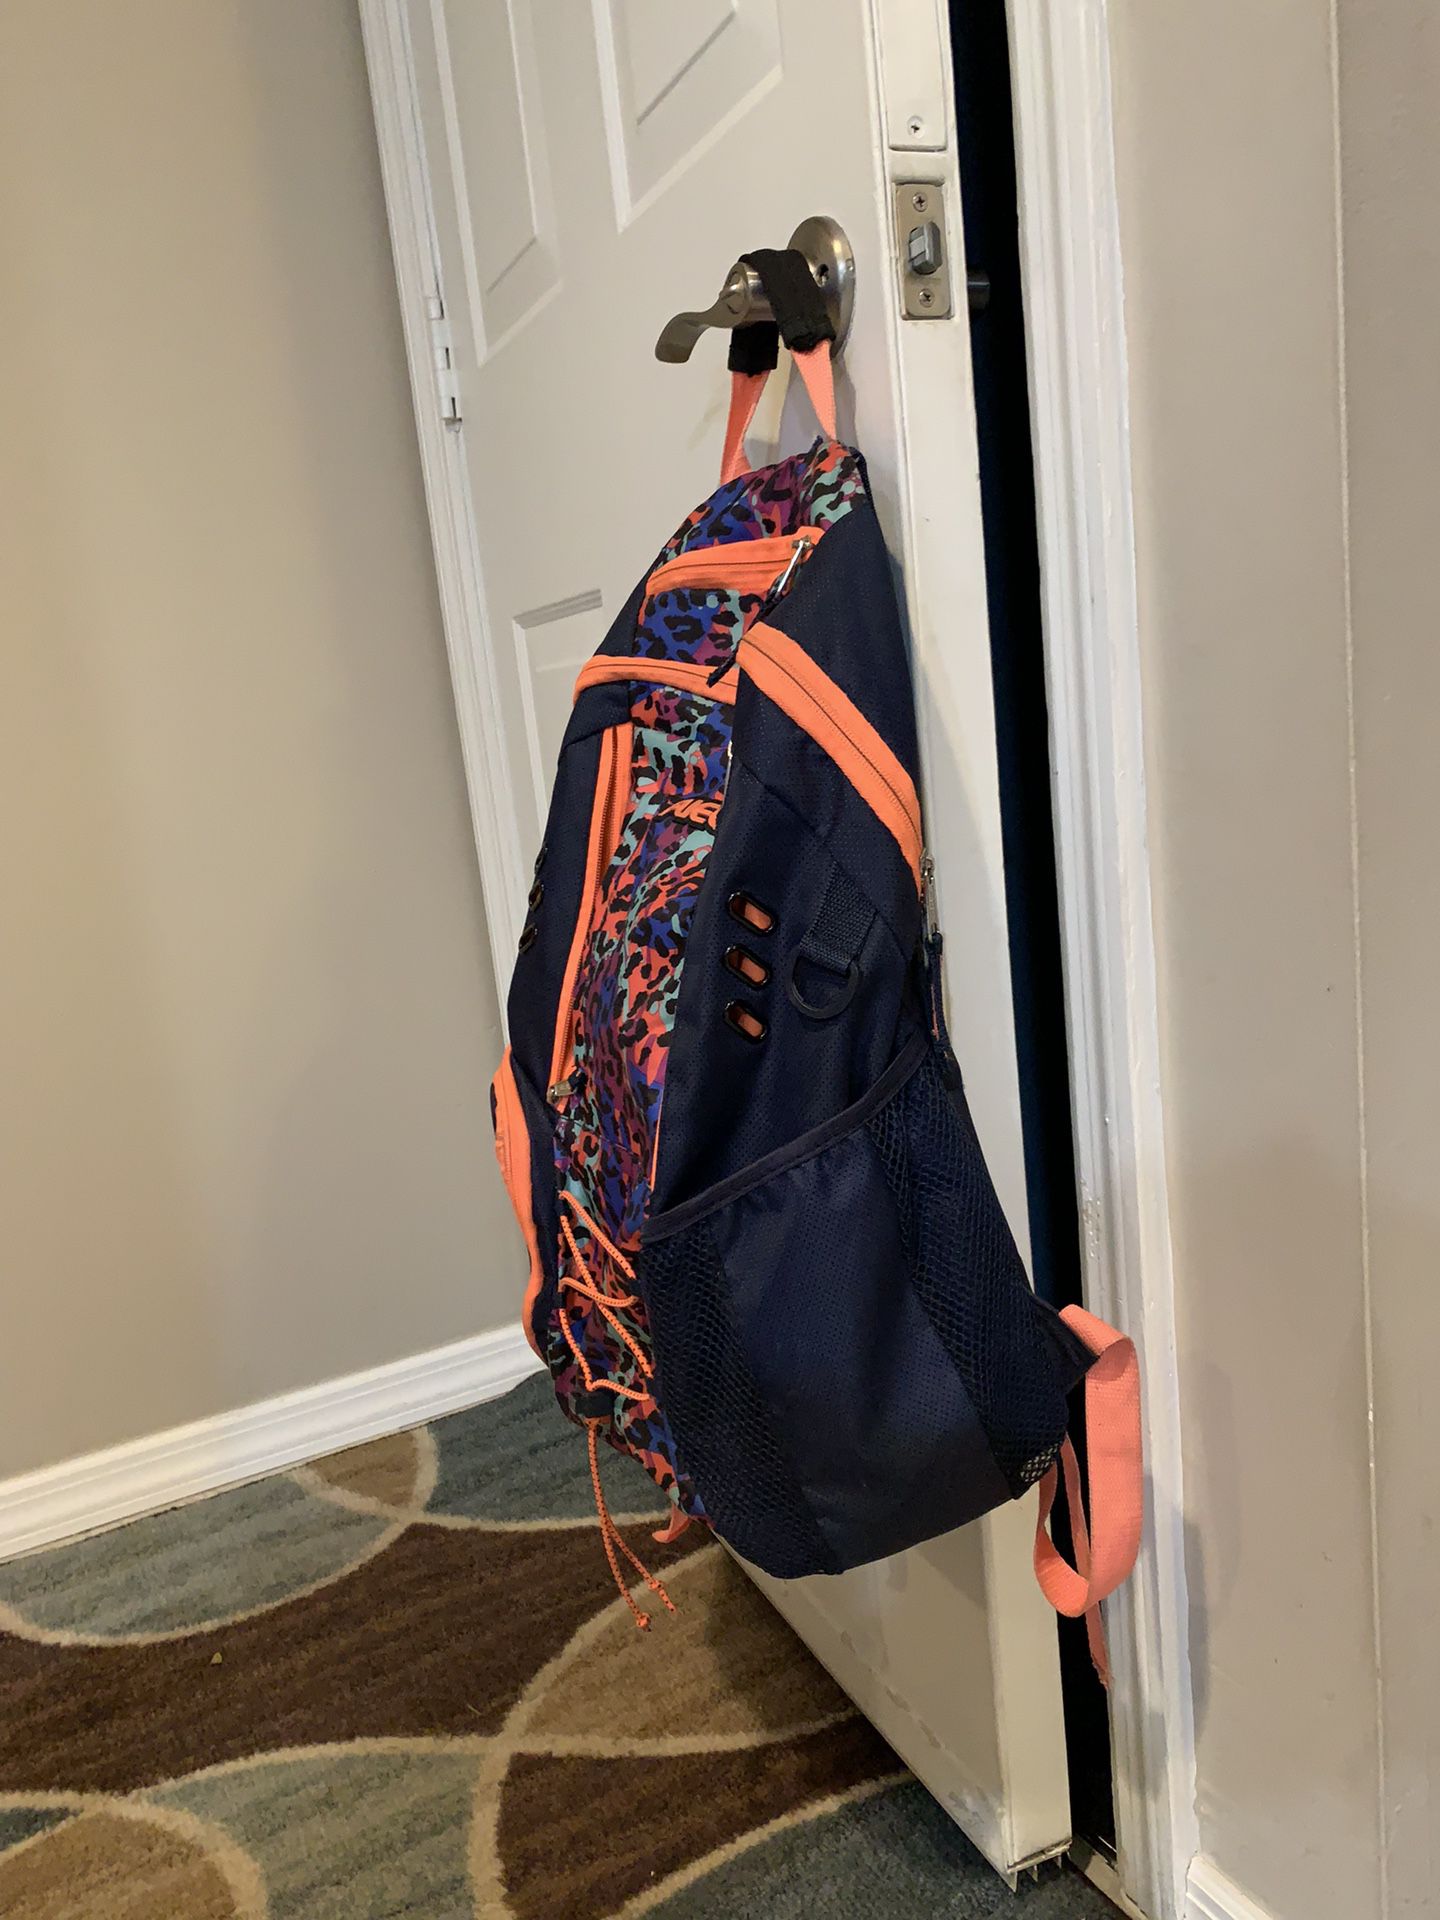 Alyx backpack for Sale in Somers Point, NJ - OfferUp